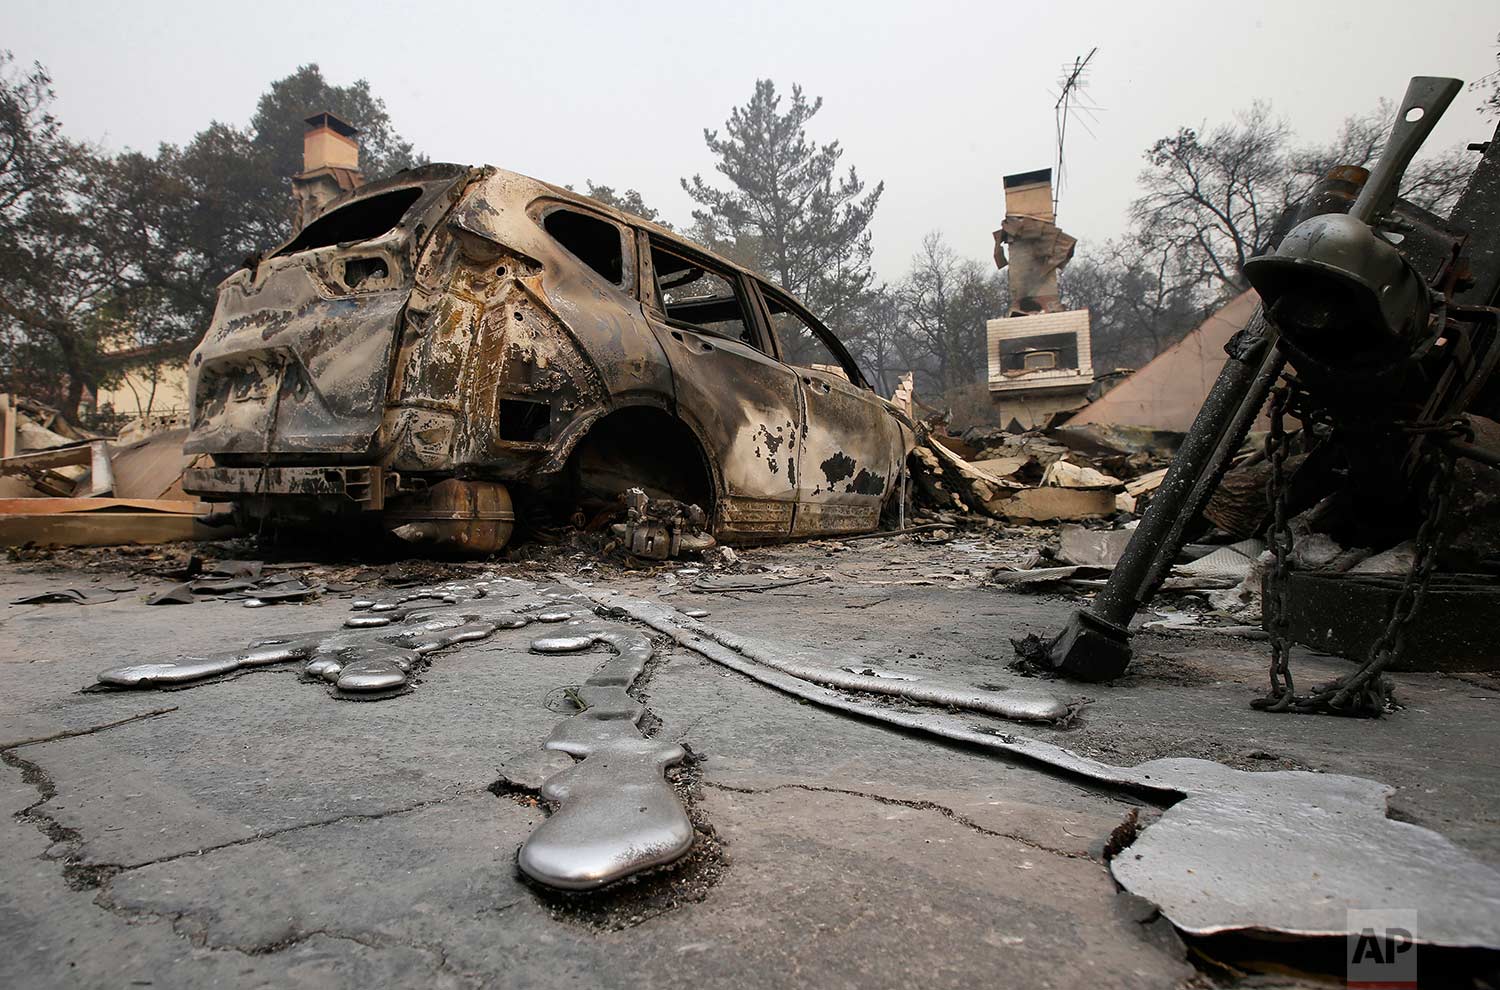  Streams of solidified melted metal reach out from a destroyed vehicle parked at a home Tuesday, Oct. 10, 2017, after a wildfire near Napa, Calif. (AP Photo/Rich Pedroncelli) 